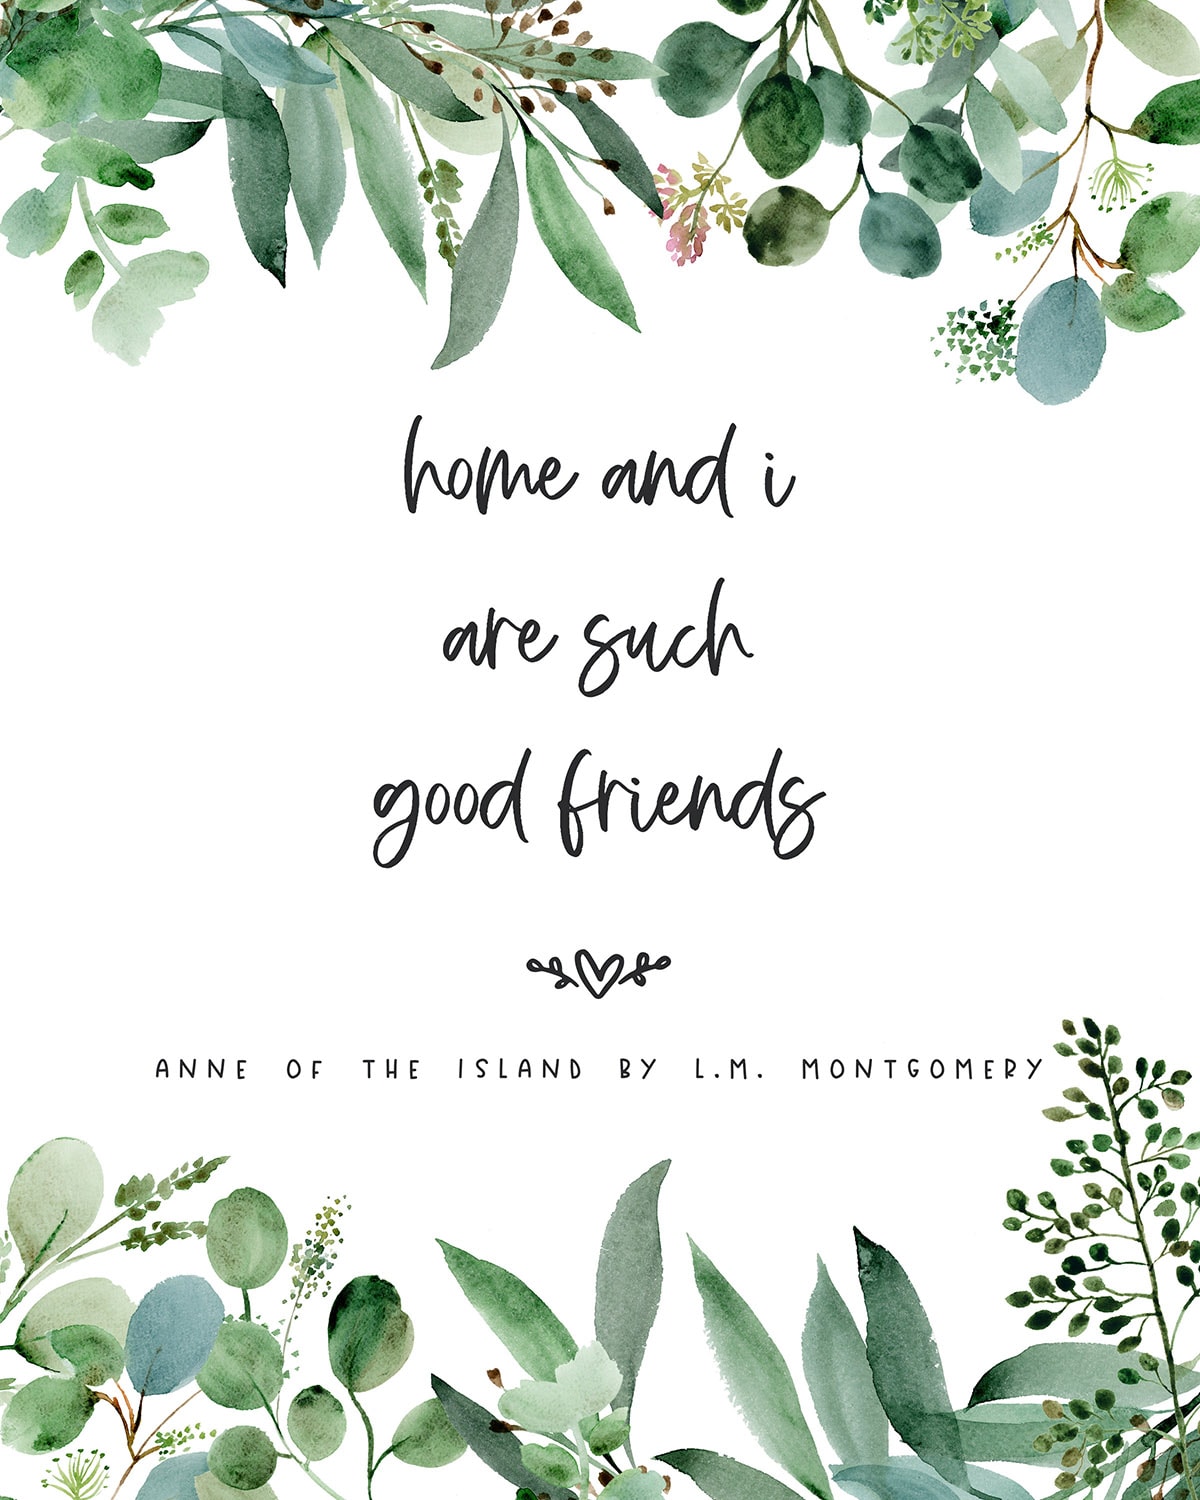 A Eucalyptus print with a quote from Anne of the Island by L.M. Montgomery.